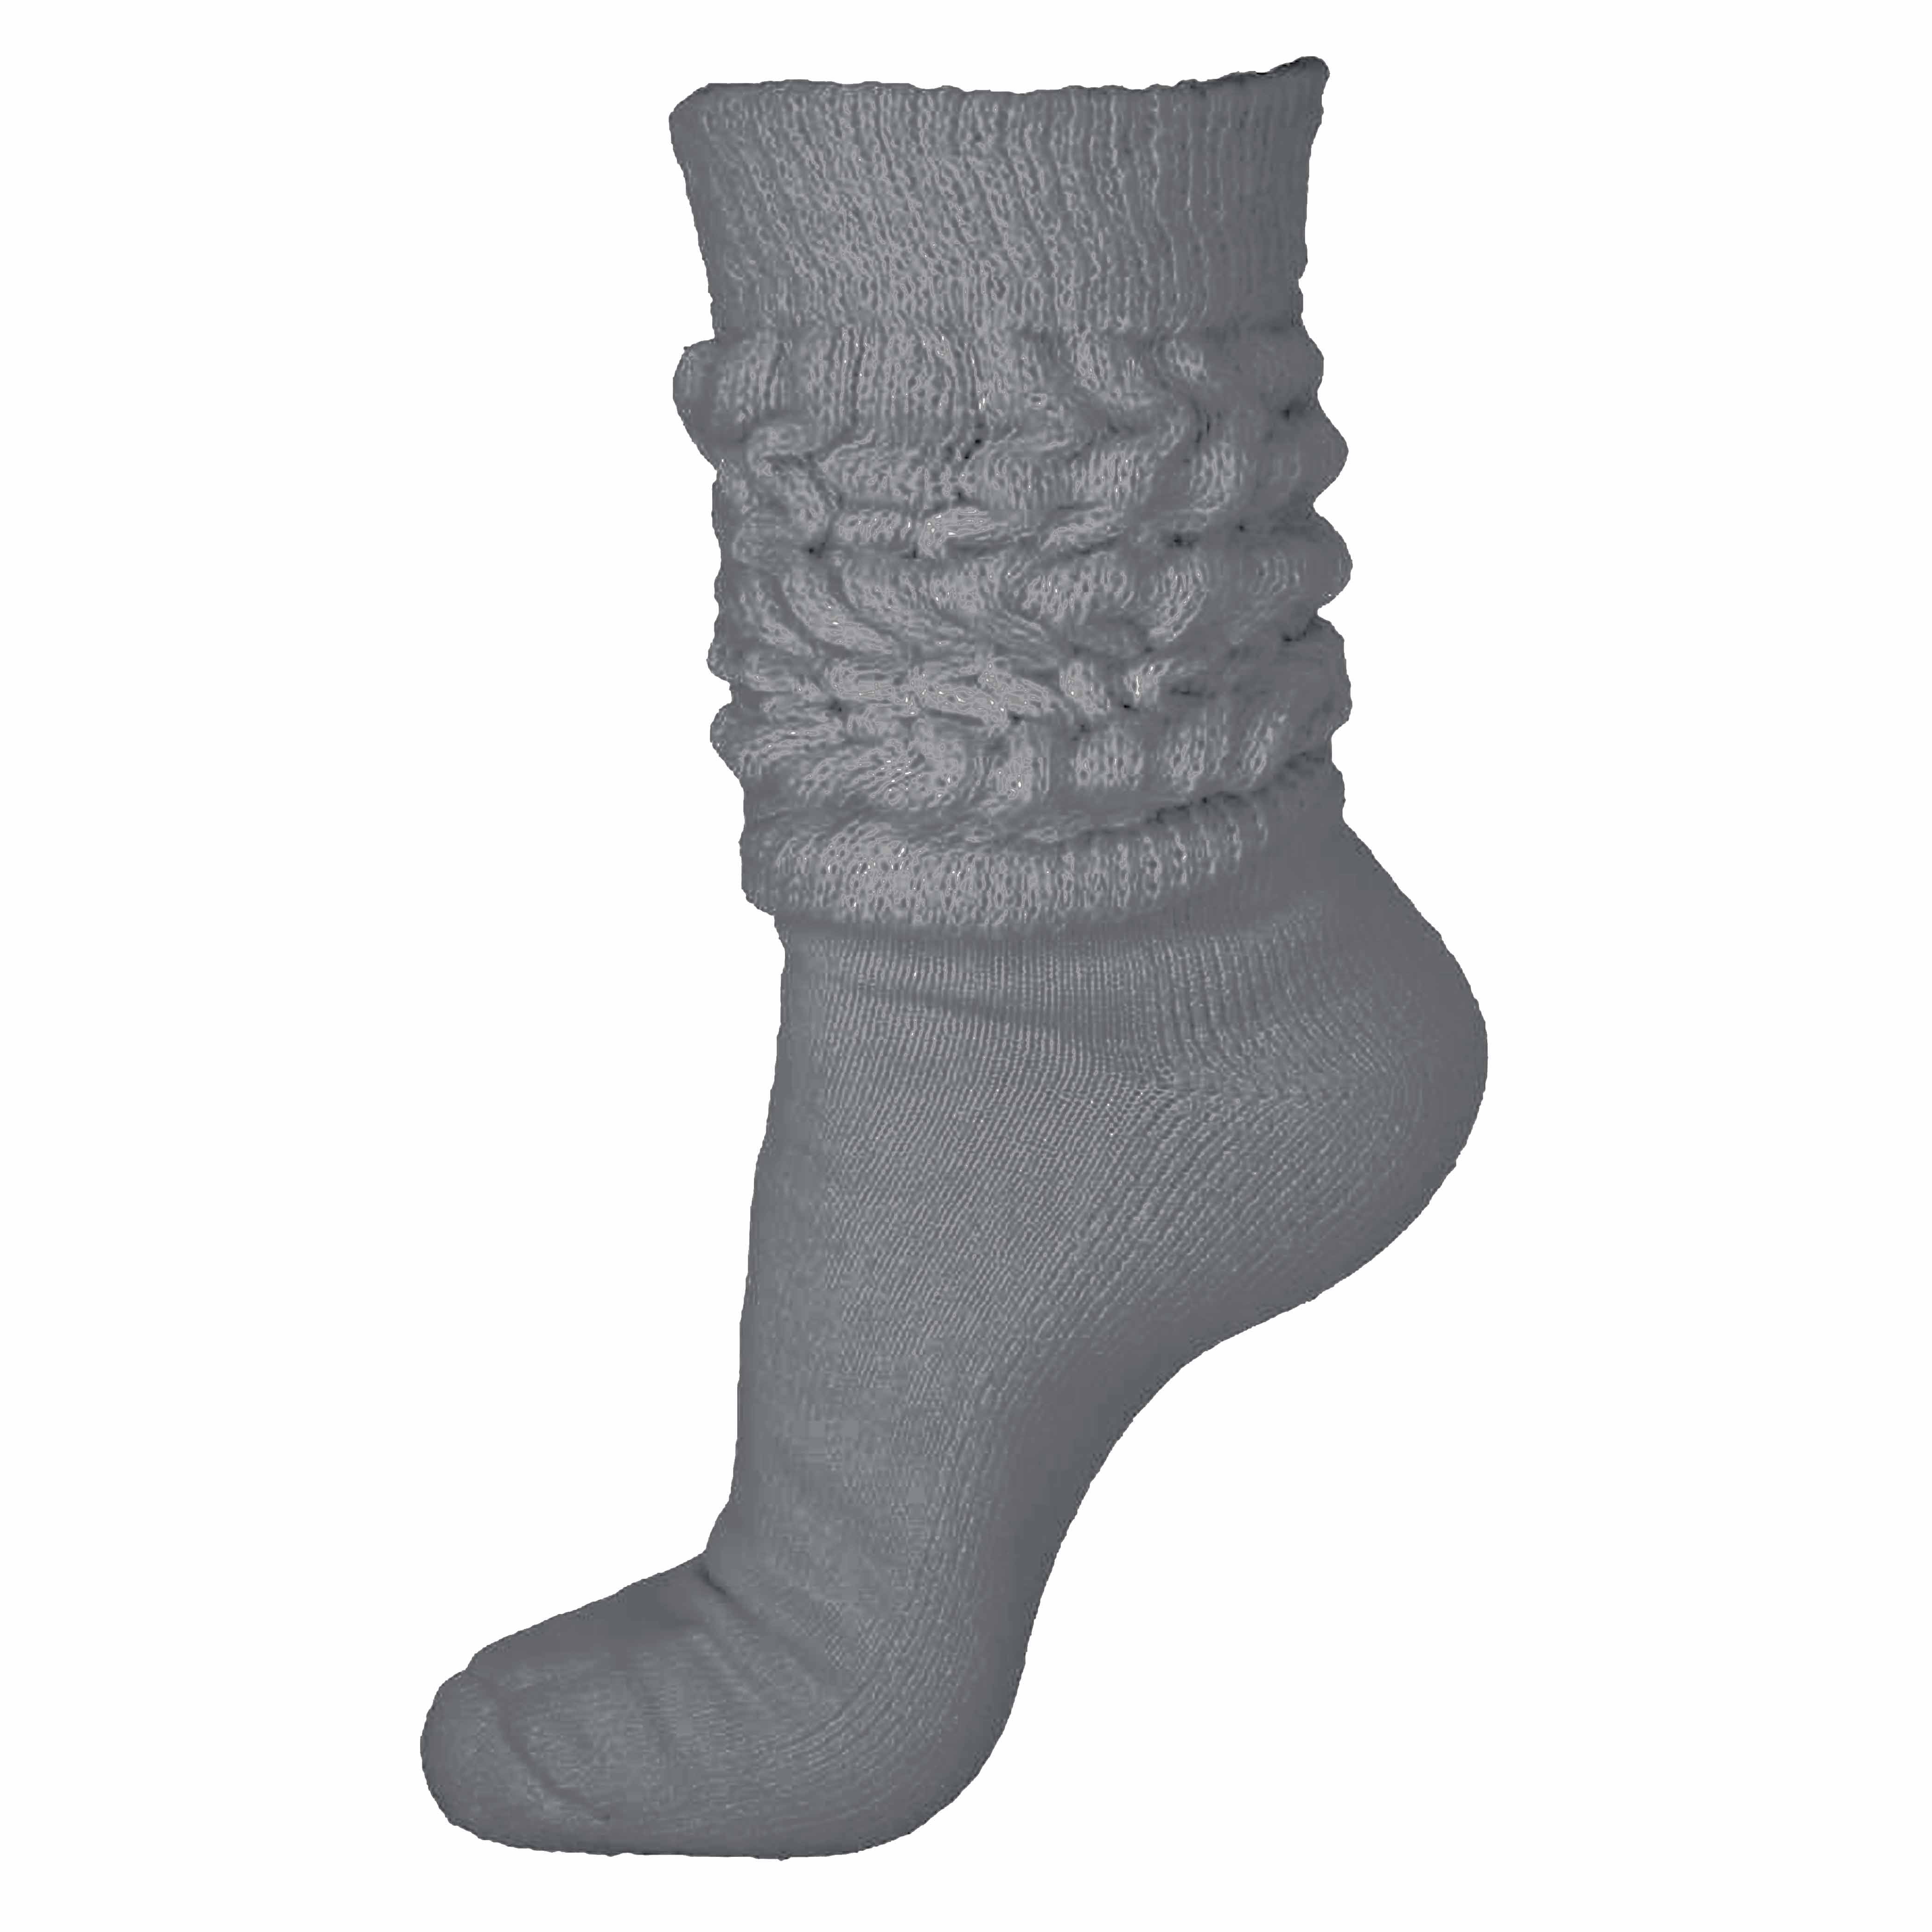 Grey Marl Knitted Slouchy Socks, Accessories